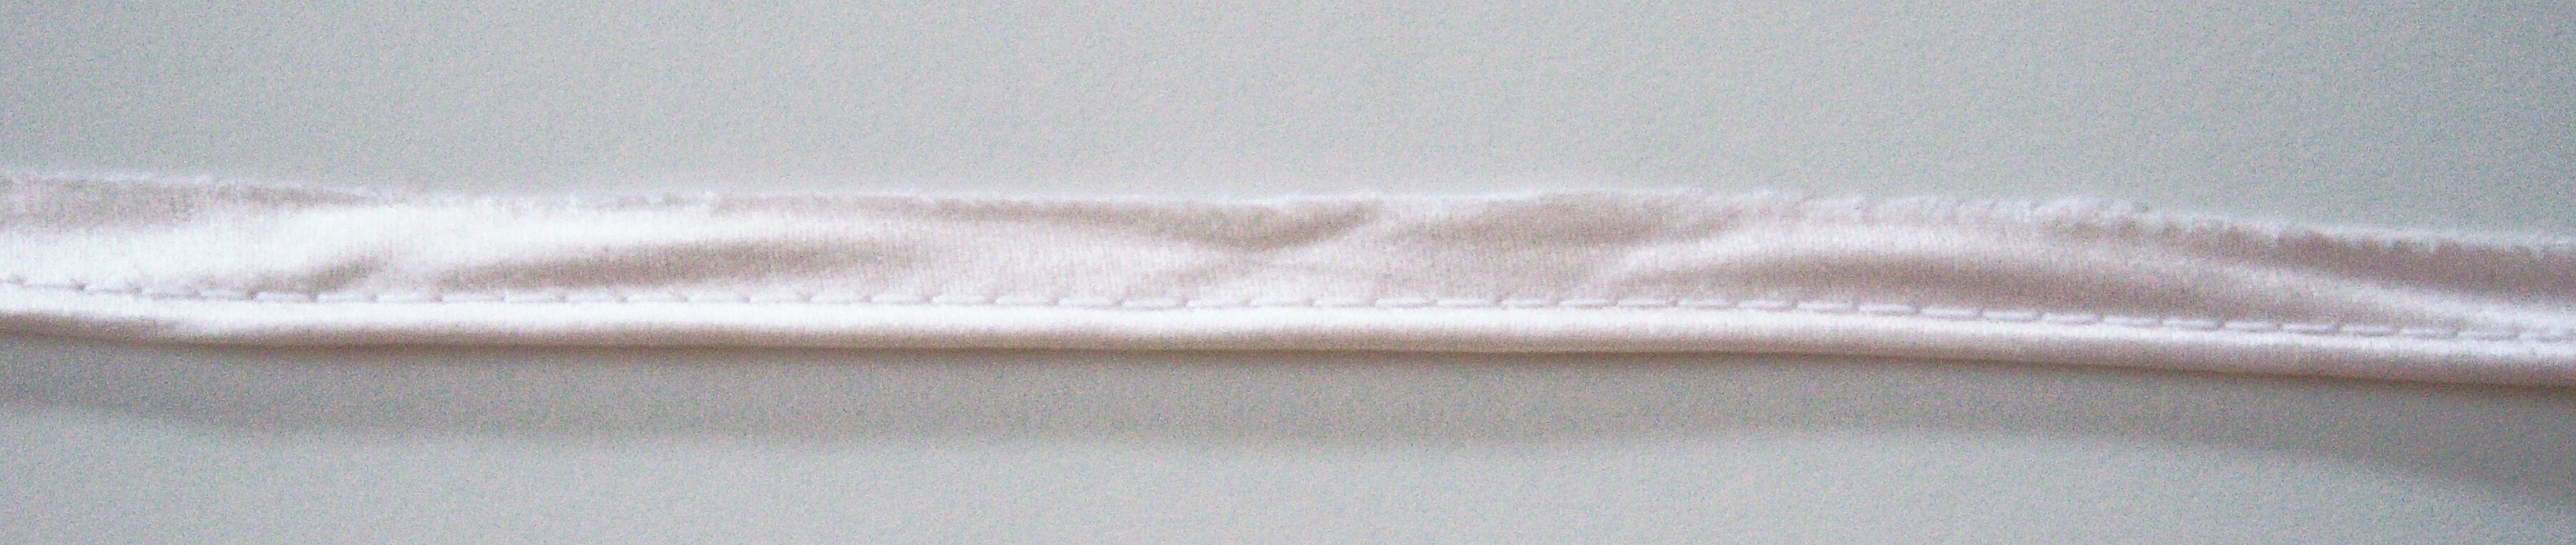 Antique White Satin Covered 1/16" Piping